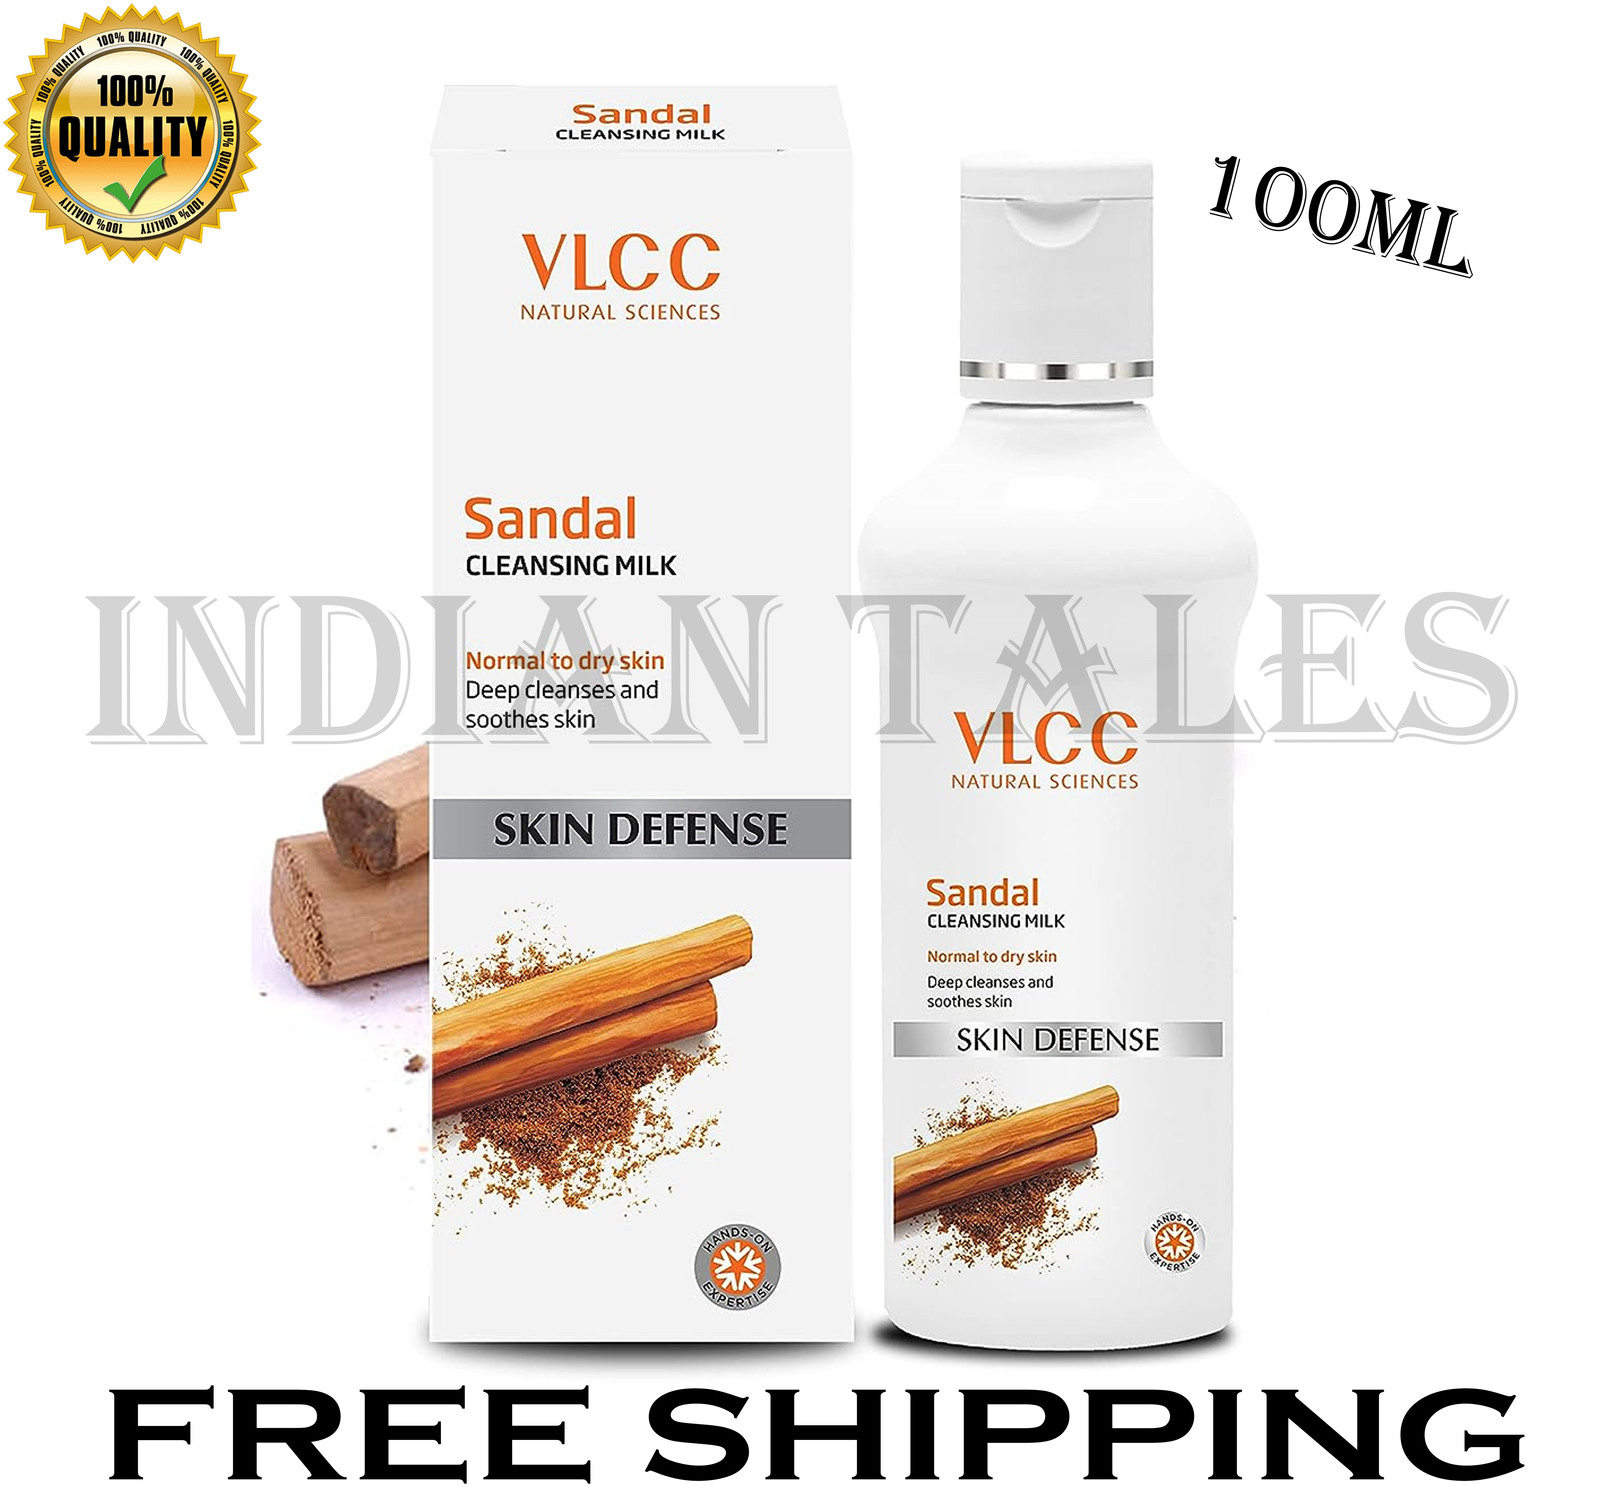 VLCC Sandal Cleansing Milk -100ml- Deep Cleanses & Soothes Skin with Sandal - $22.99